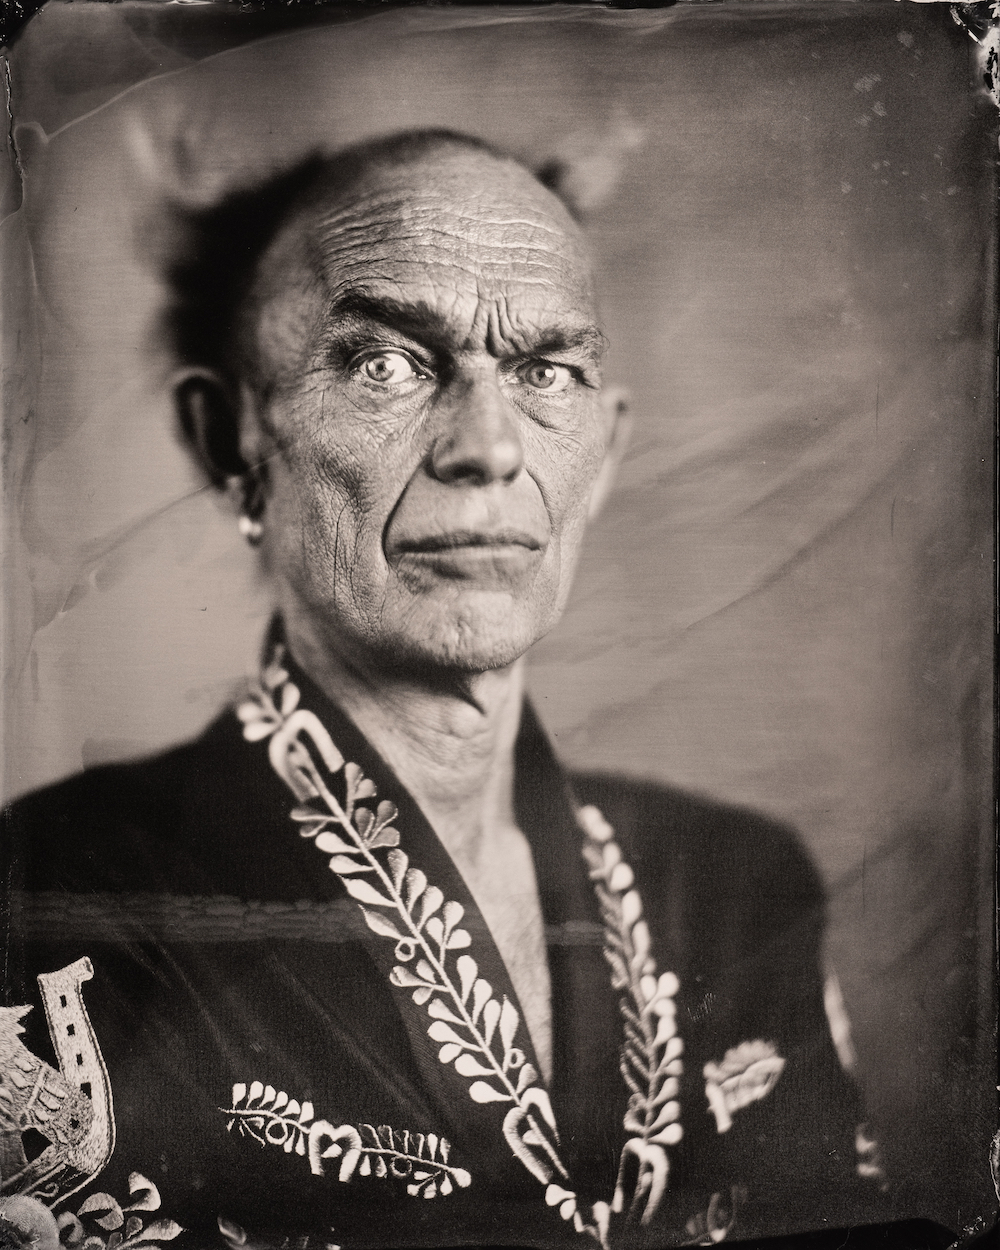 Doug Francisco of The Invisible Circus. 8x10 wet plate collodion tintype. © Guy Bellingham/International Portrait Photographer of the Year 2022